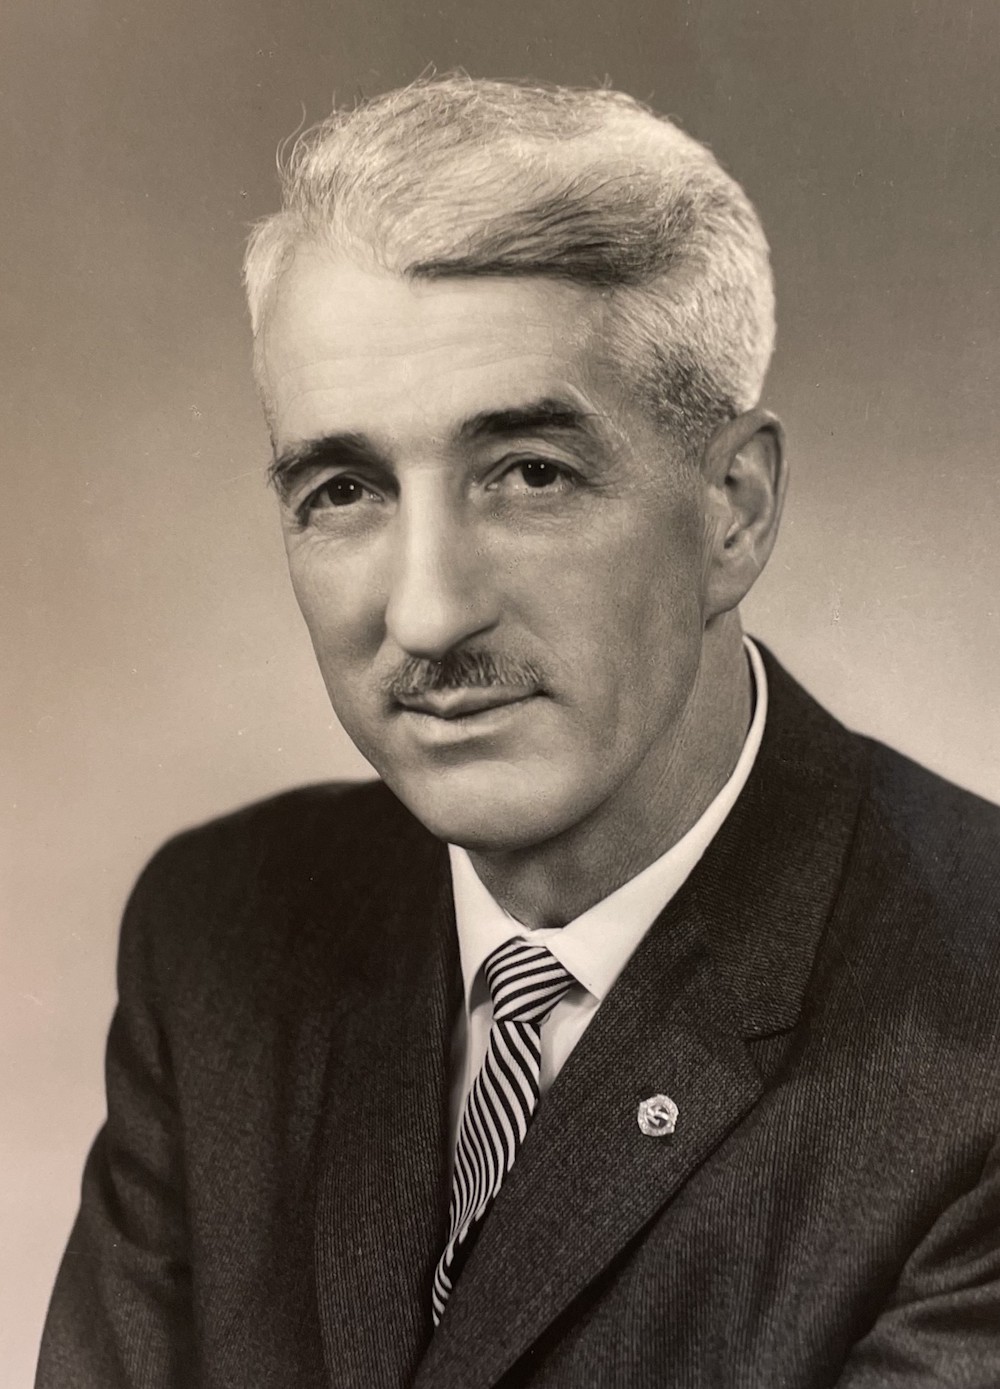 A black and white archive photograph of a light-skinned man with a slight smile wearing a dress shirt, a suit and a striped tie. He has white or grey hair and sports a moustache. He is wearing a pin on the left side of his chest.